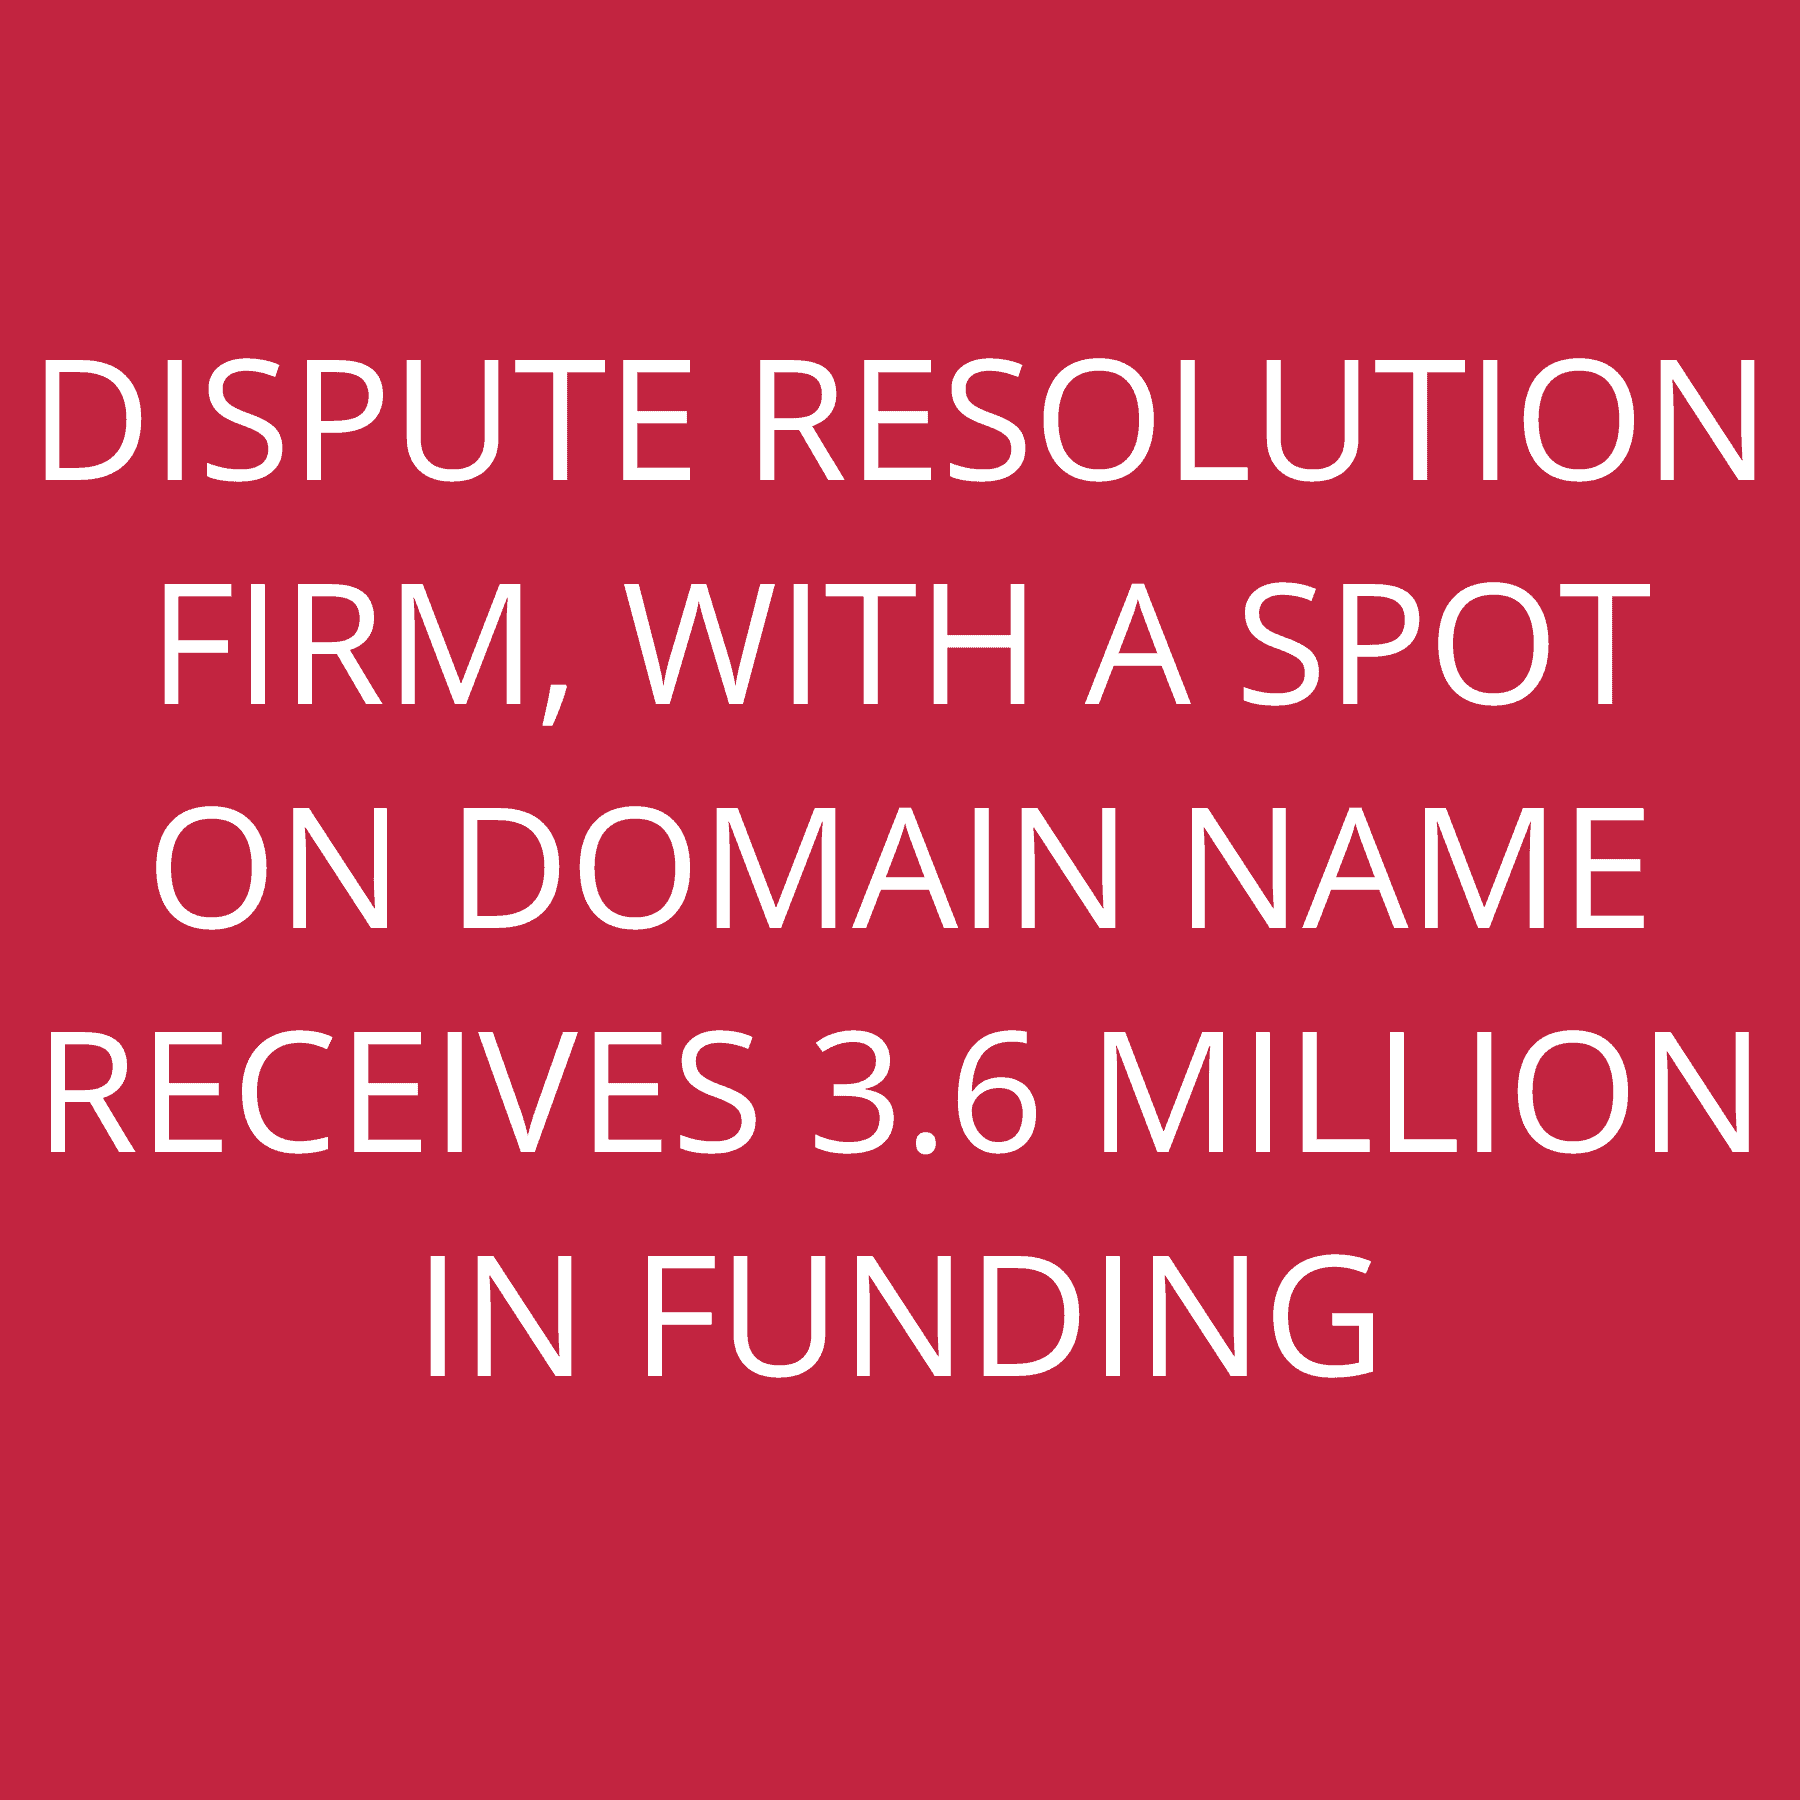 Dispute Resolution firm, with a spot on domain name receives 3.6 Million in funding